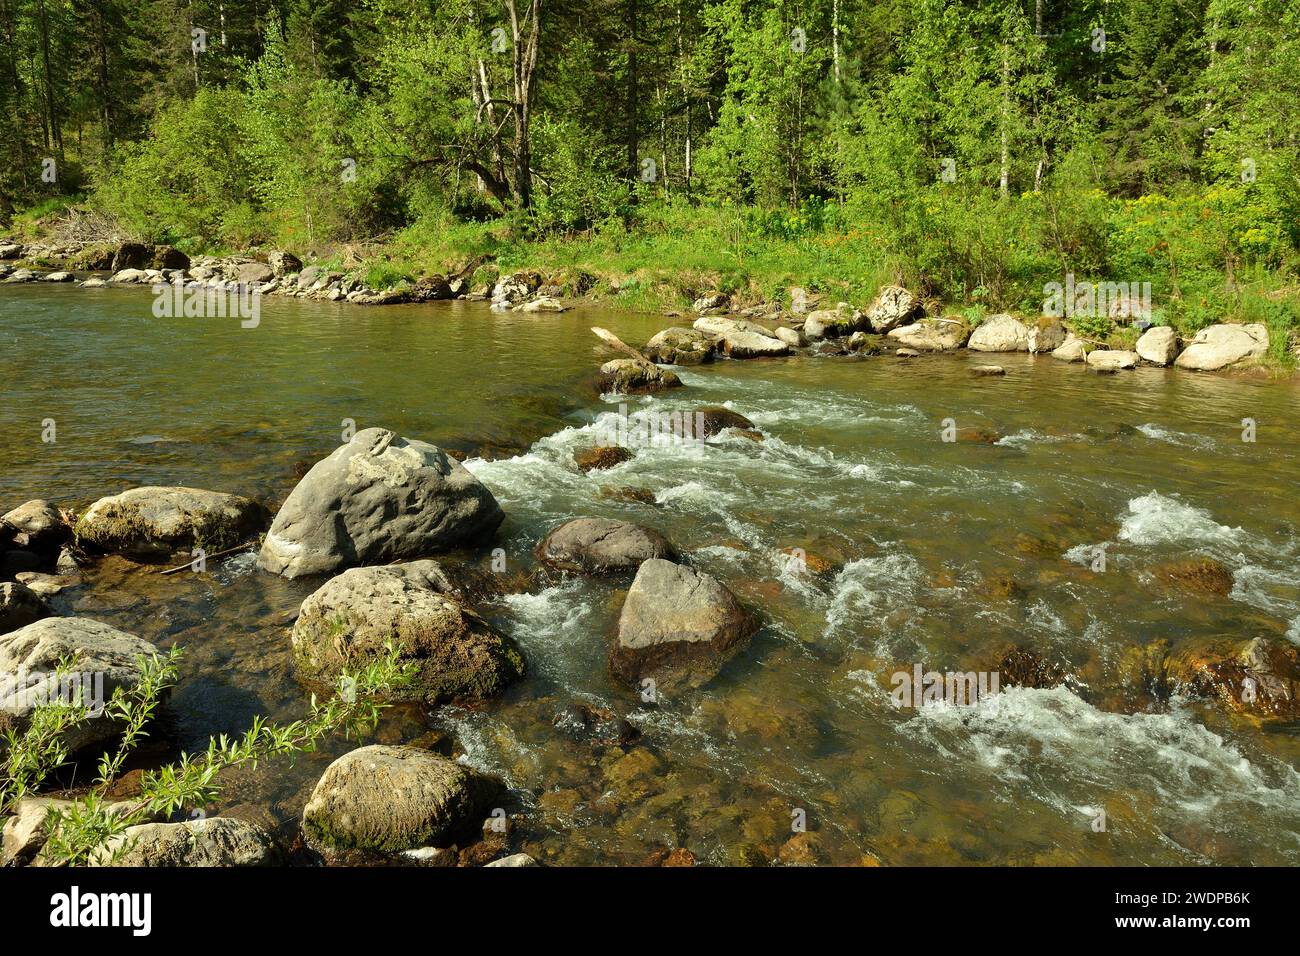 Large stones across the bed of a small fast-moving river flowing from the mountains through a dense forest on a sunny summer day. Iogach river, Altai, Stock Photo